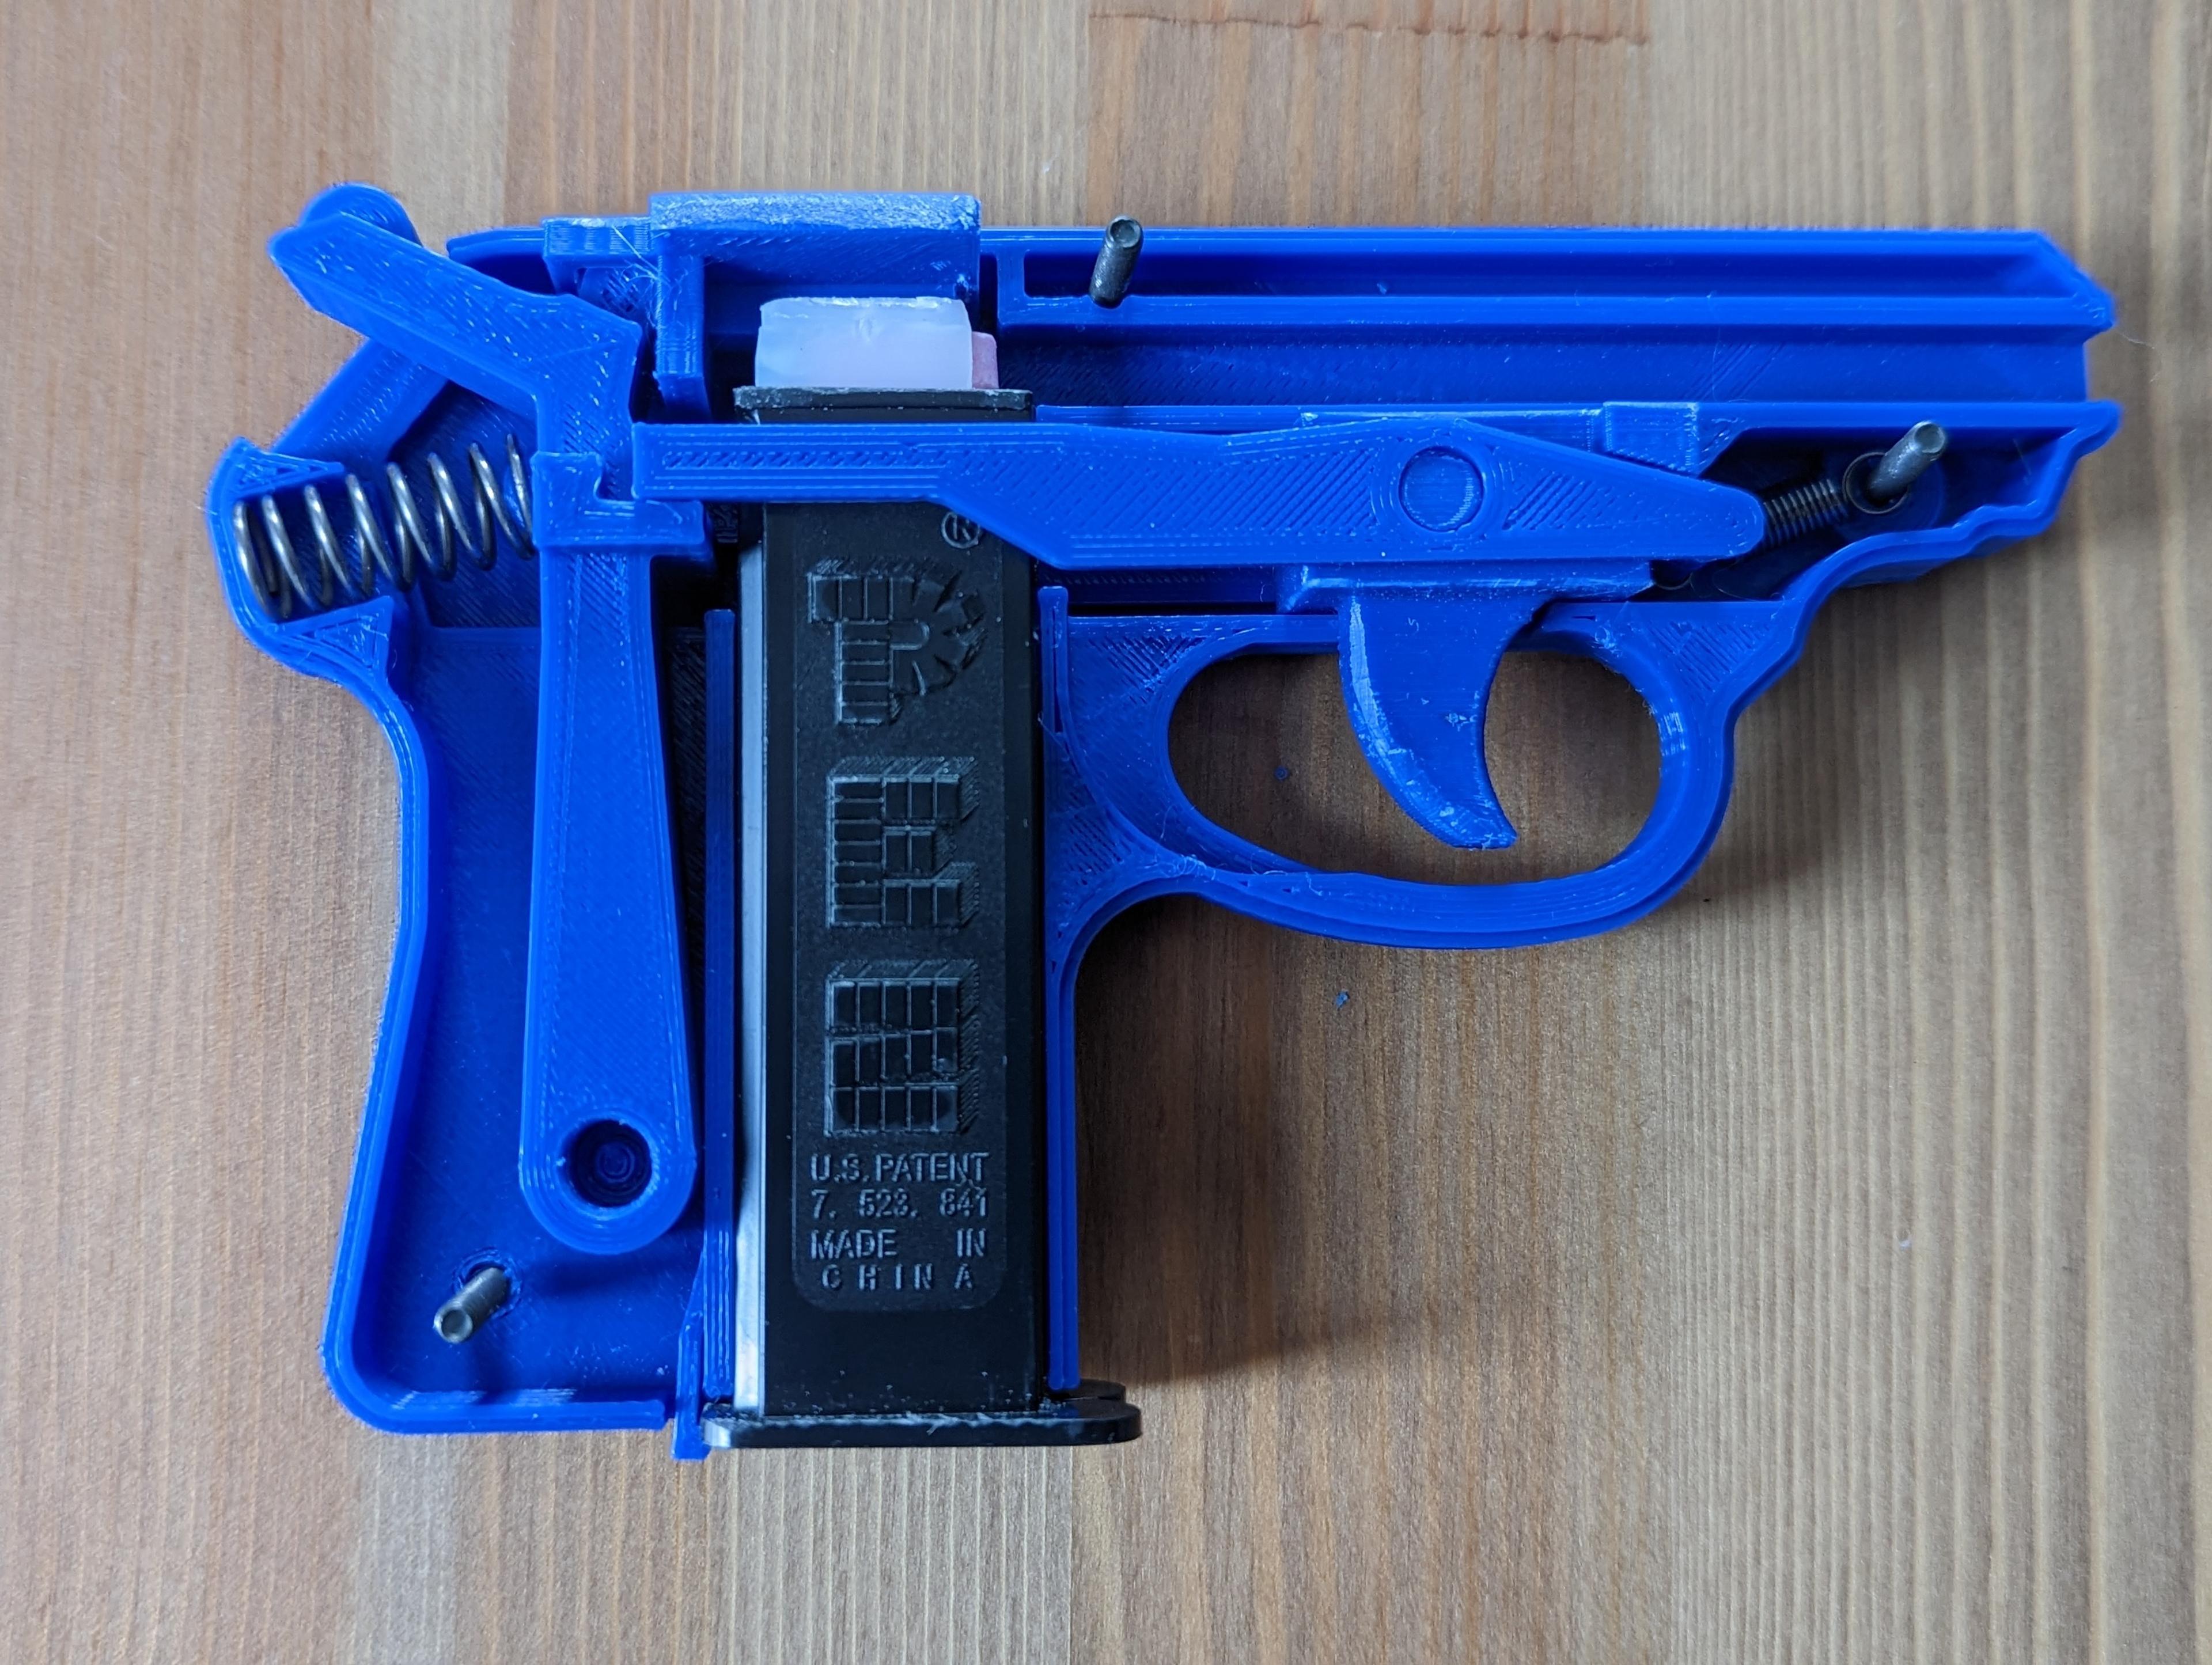 CANDY GAT - THE 3D PRINTABLE CANDY SHOOTER 3d model